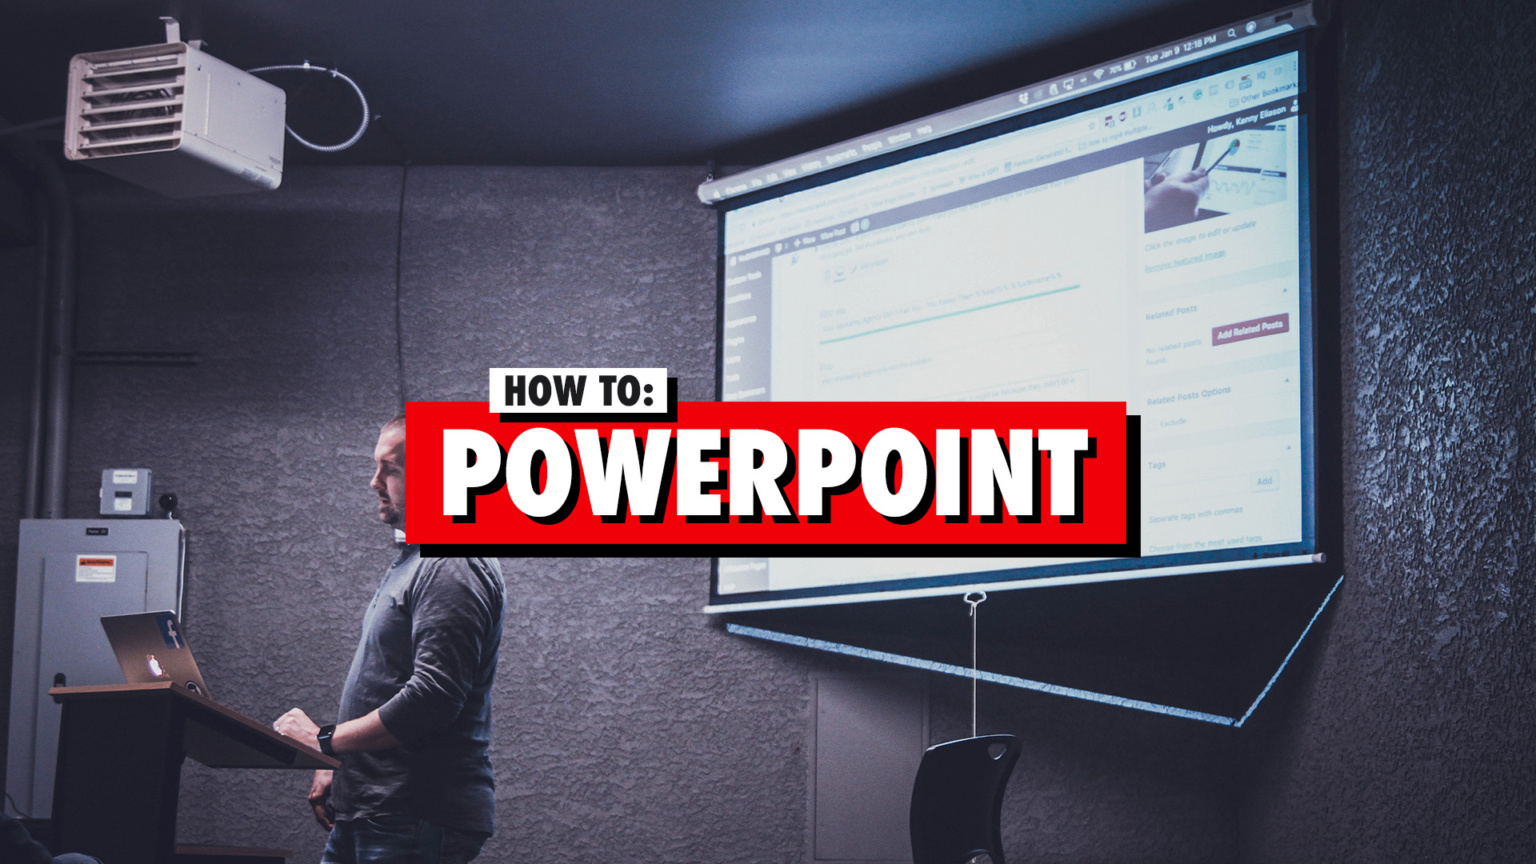 Trevor Ambrose Public Speaking Sales Training Blog How To Powerpoint